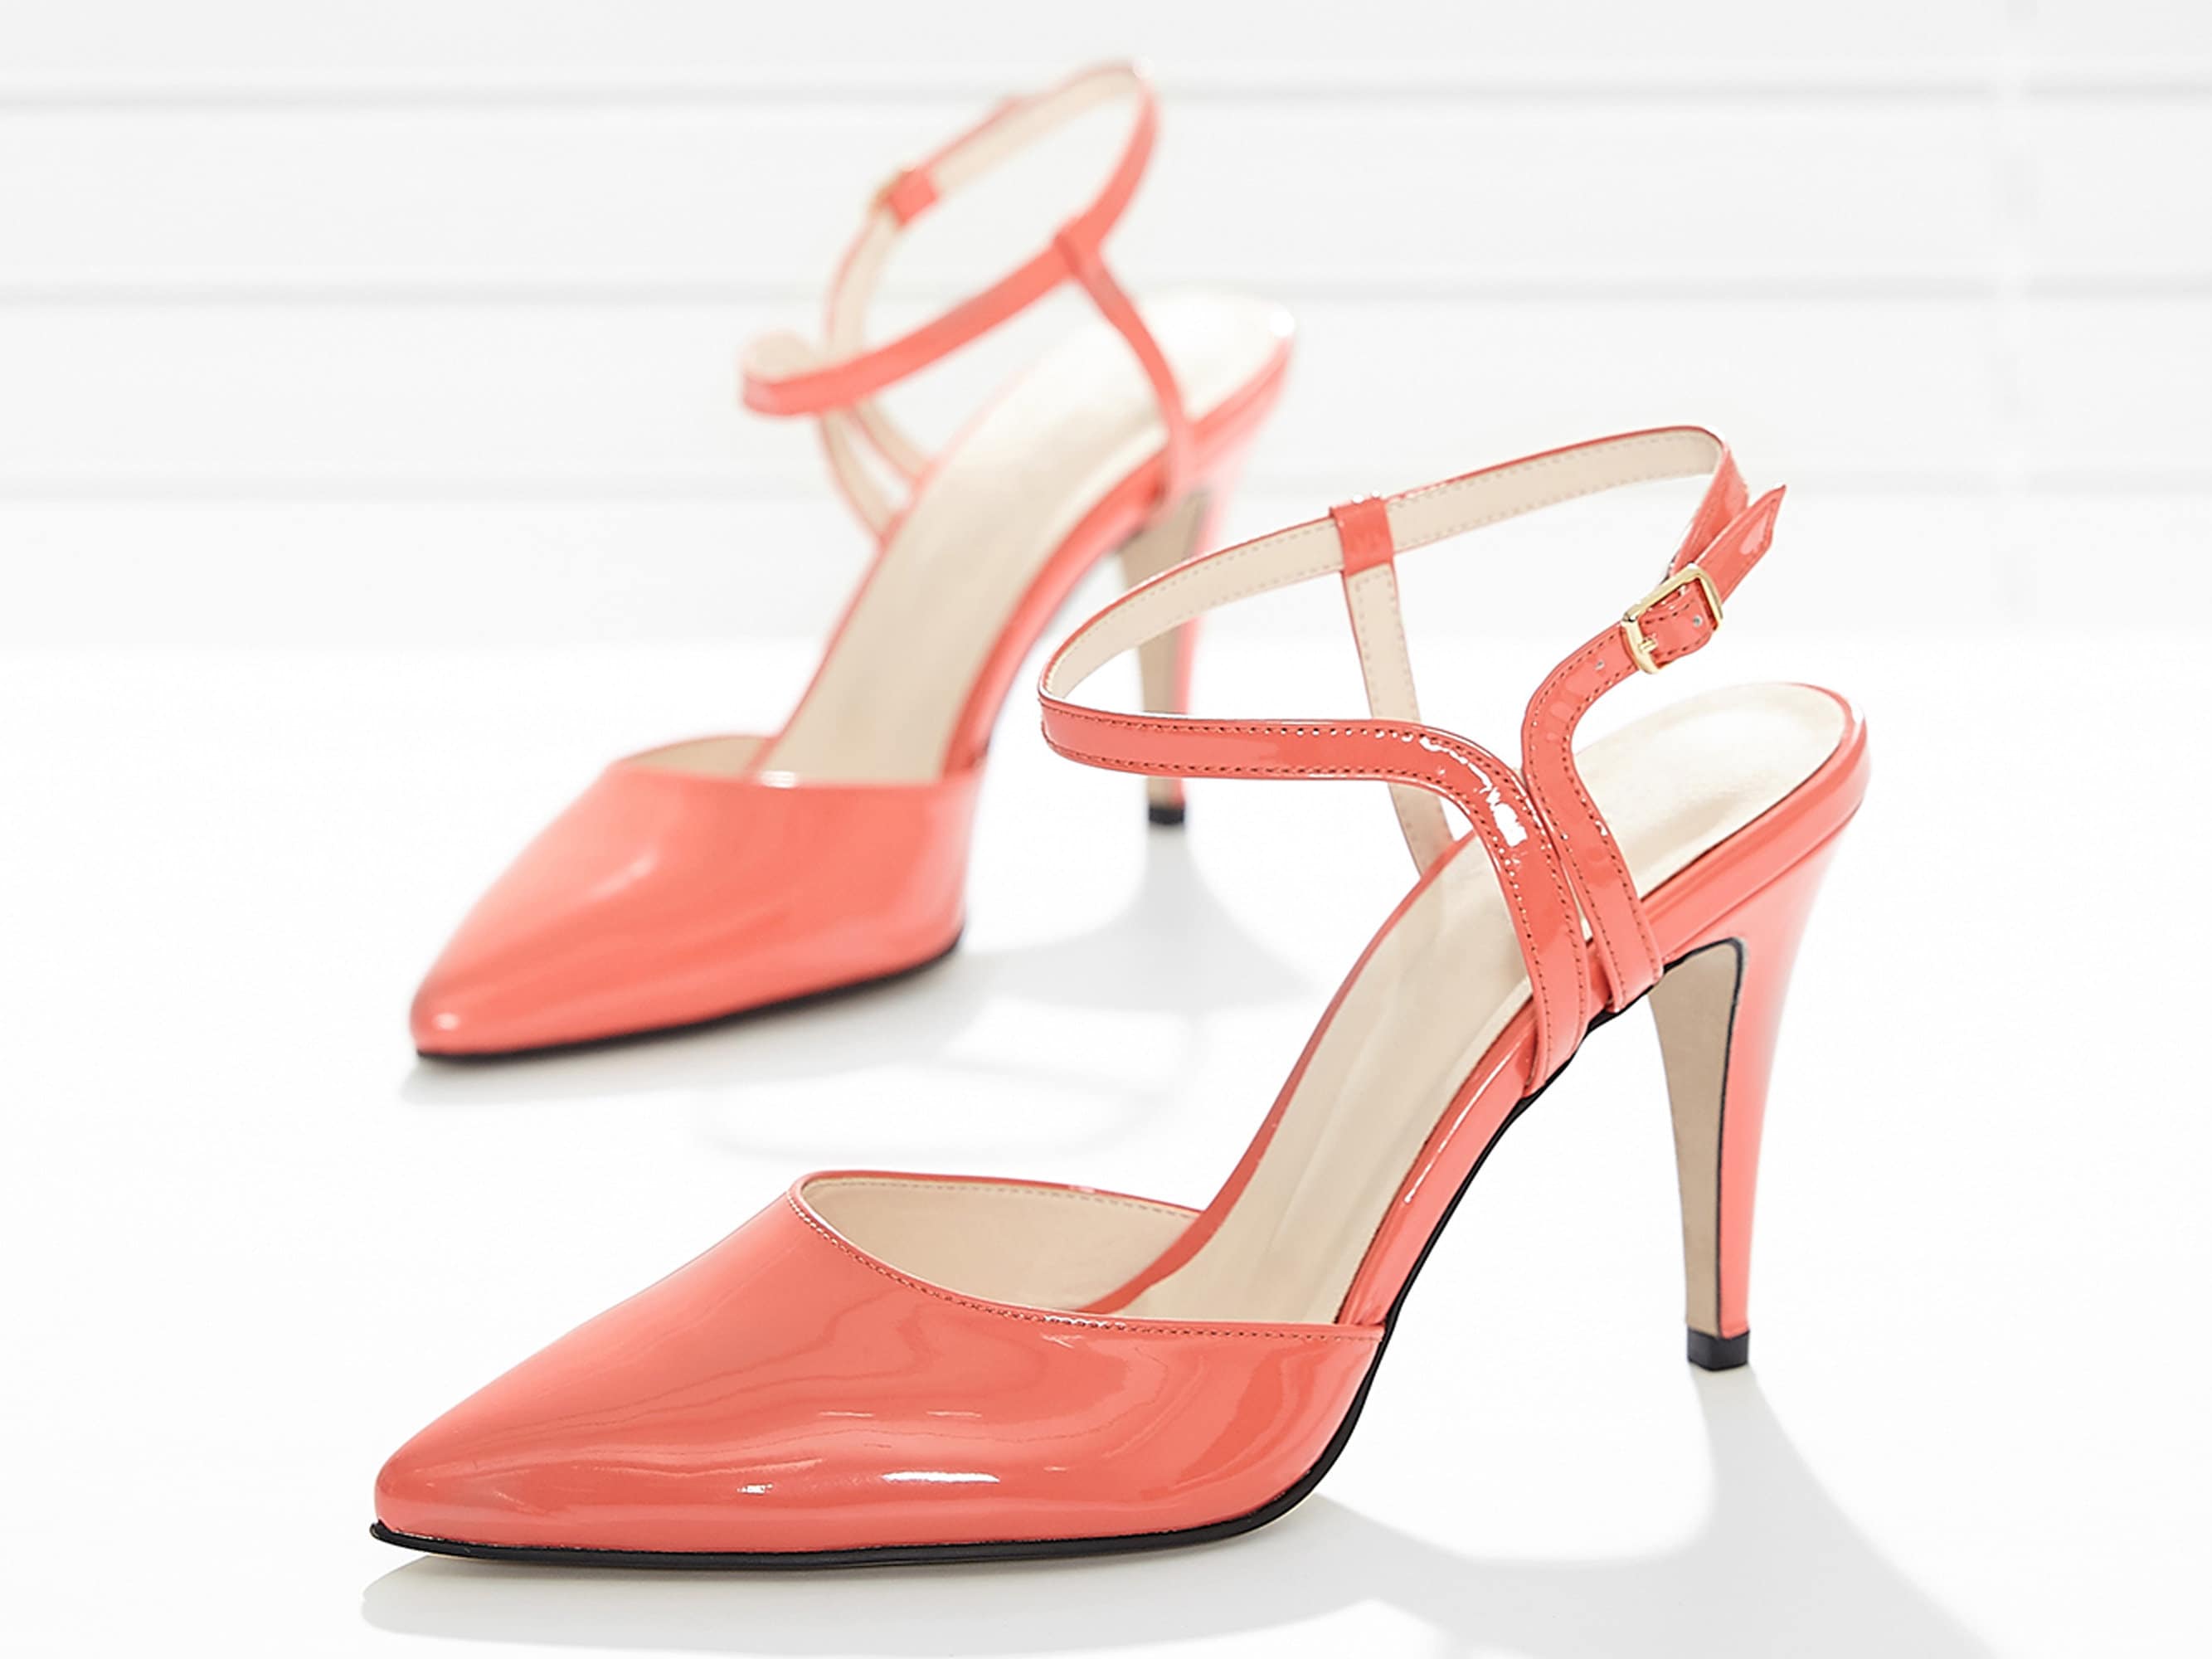 Coral Red Gold Ankle Strap Heels Pointed Toe Stiletto Heels Pumps|FSJshoes